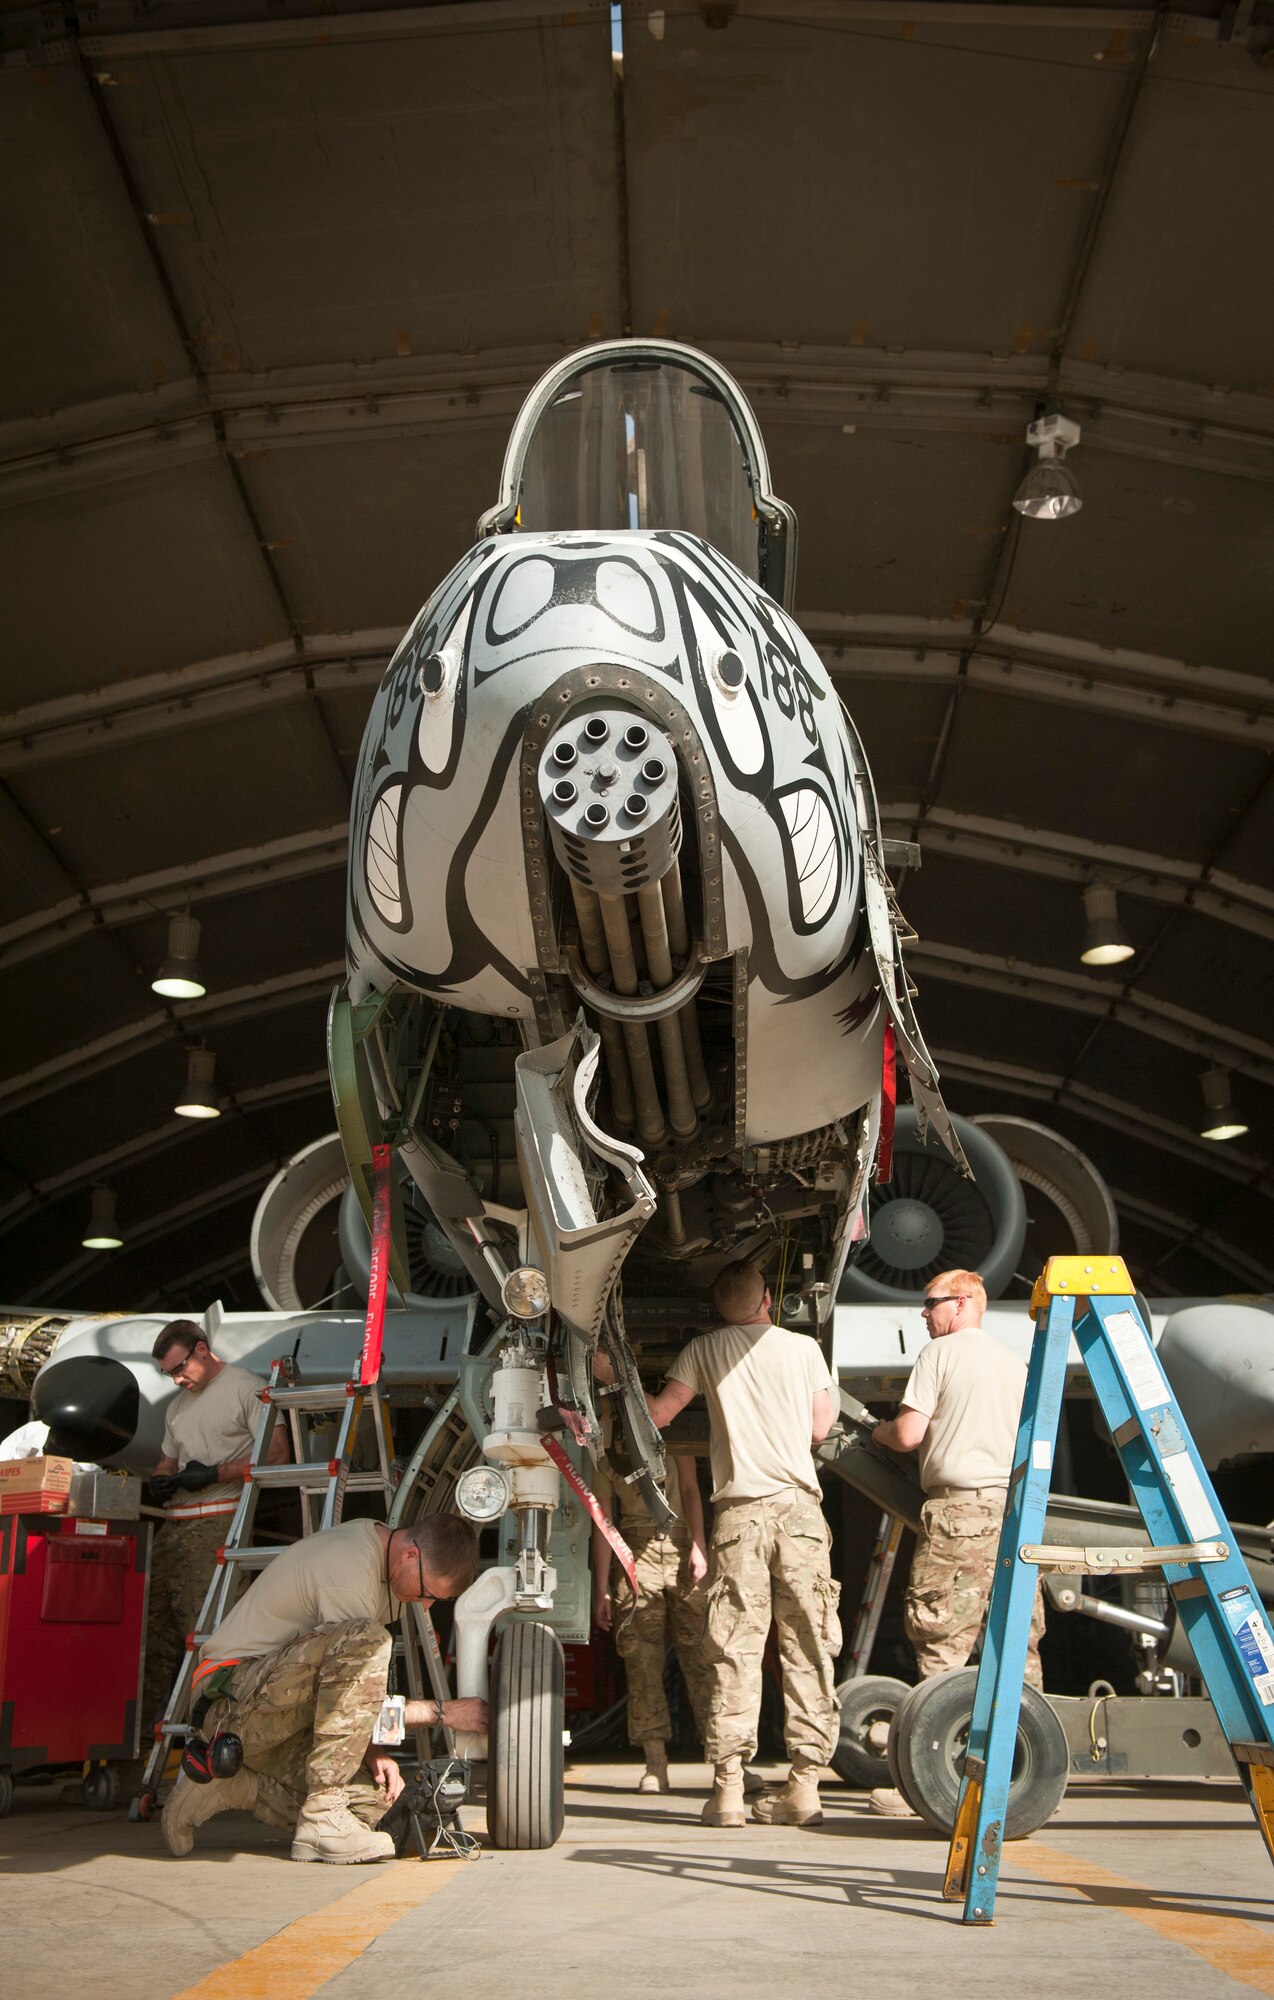 Maintainers with the 188th Fighter Wing deployed with the 455th Expeditionary Maintenance Squadron work on a 188th A-10 Thunderbolt II during phase maintenance at Bagram Airfield, Afghanistan, August 8, 2012. While deployed, USAF aircraft endure increased flight hours and more combat maneuvers, which increases the need for routine maintenance and inspections. (U.S. Air Force photo by Capt. Raymond Geoffroy)